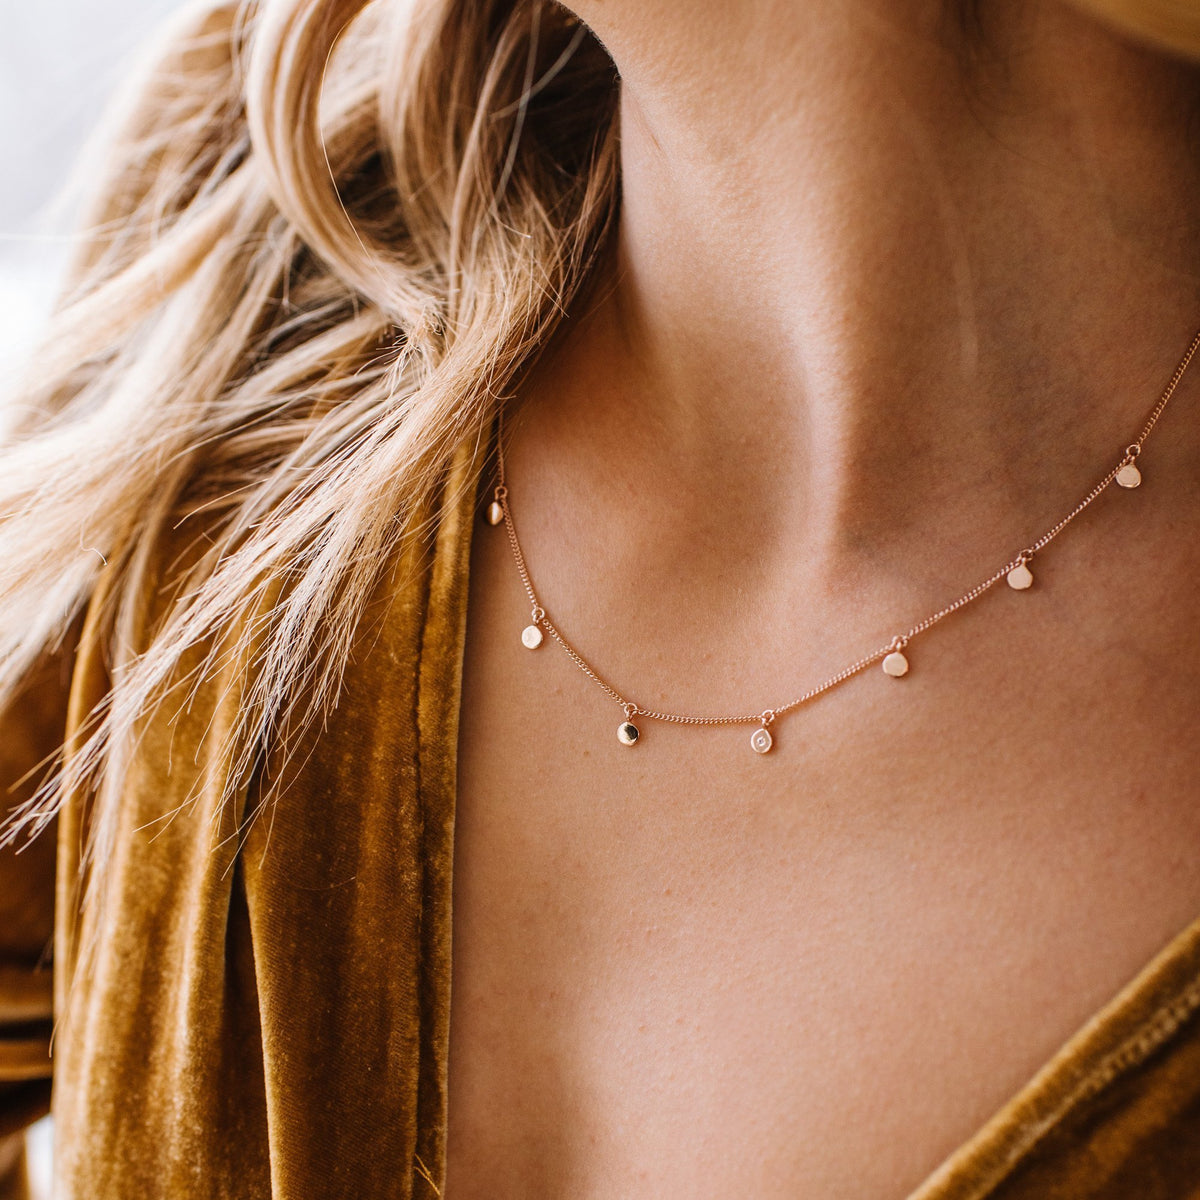 DAINTY POISE DISK NECKLACE - CUBIC ZIRCONIA &amp; ROSE GOLD - SO PRETTY CARA COTTER